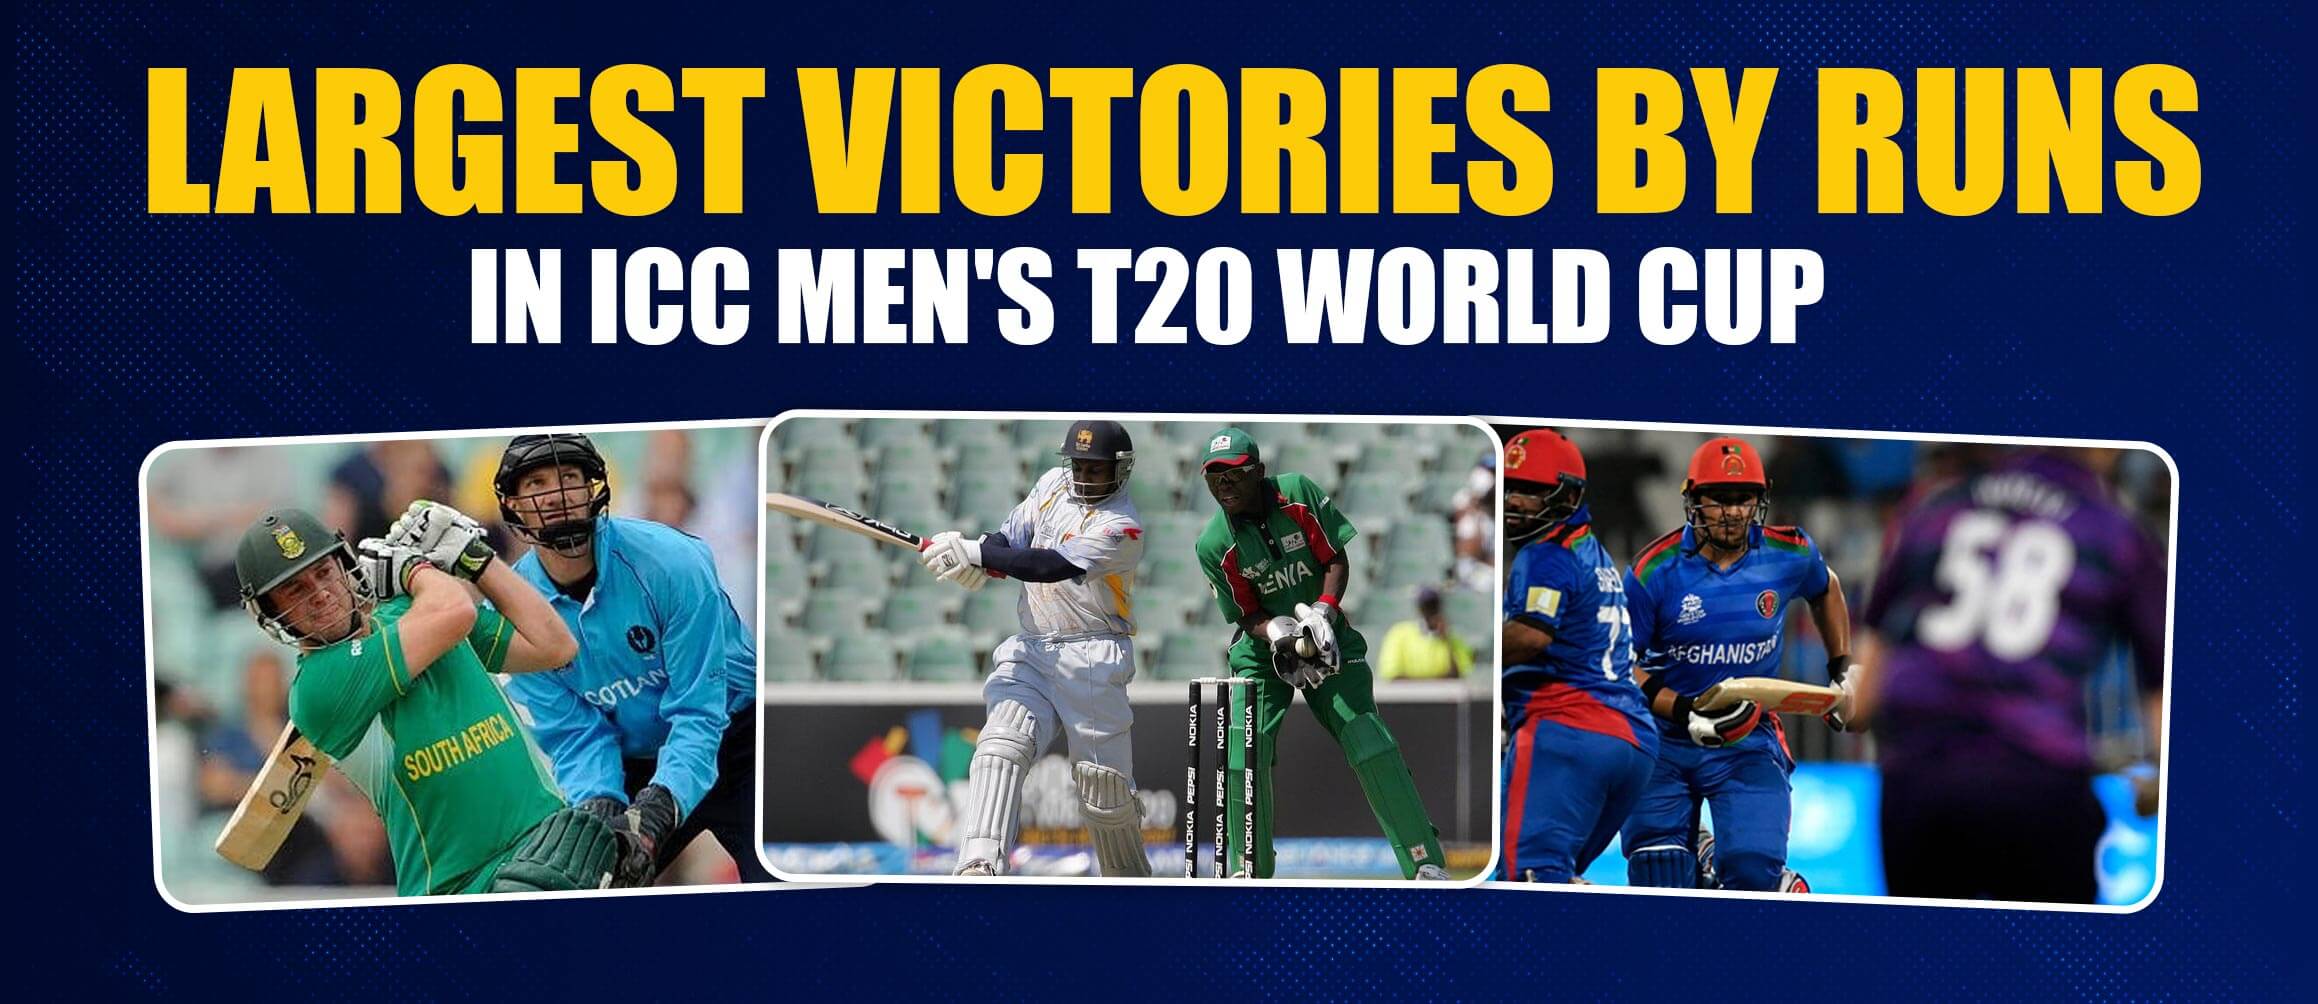 Largest Victories by Runs in ICC Men’s T20 World Cup